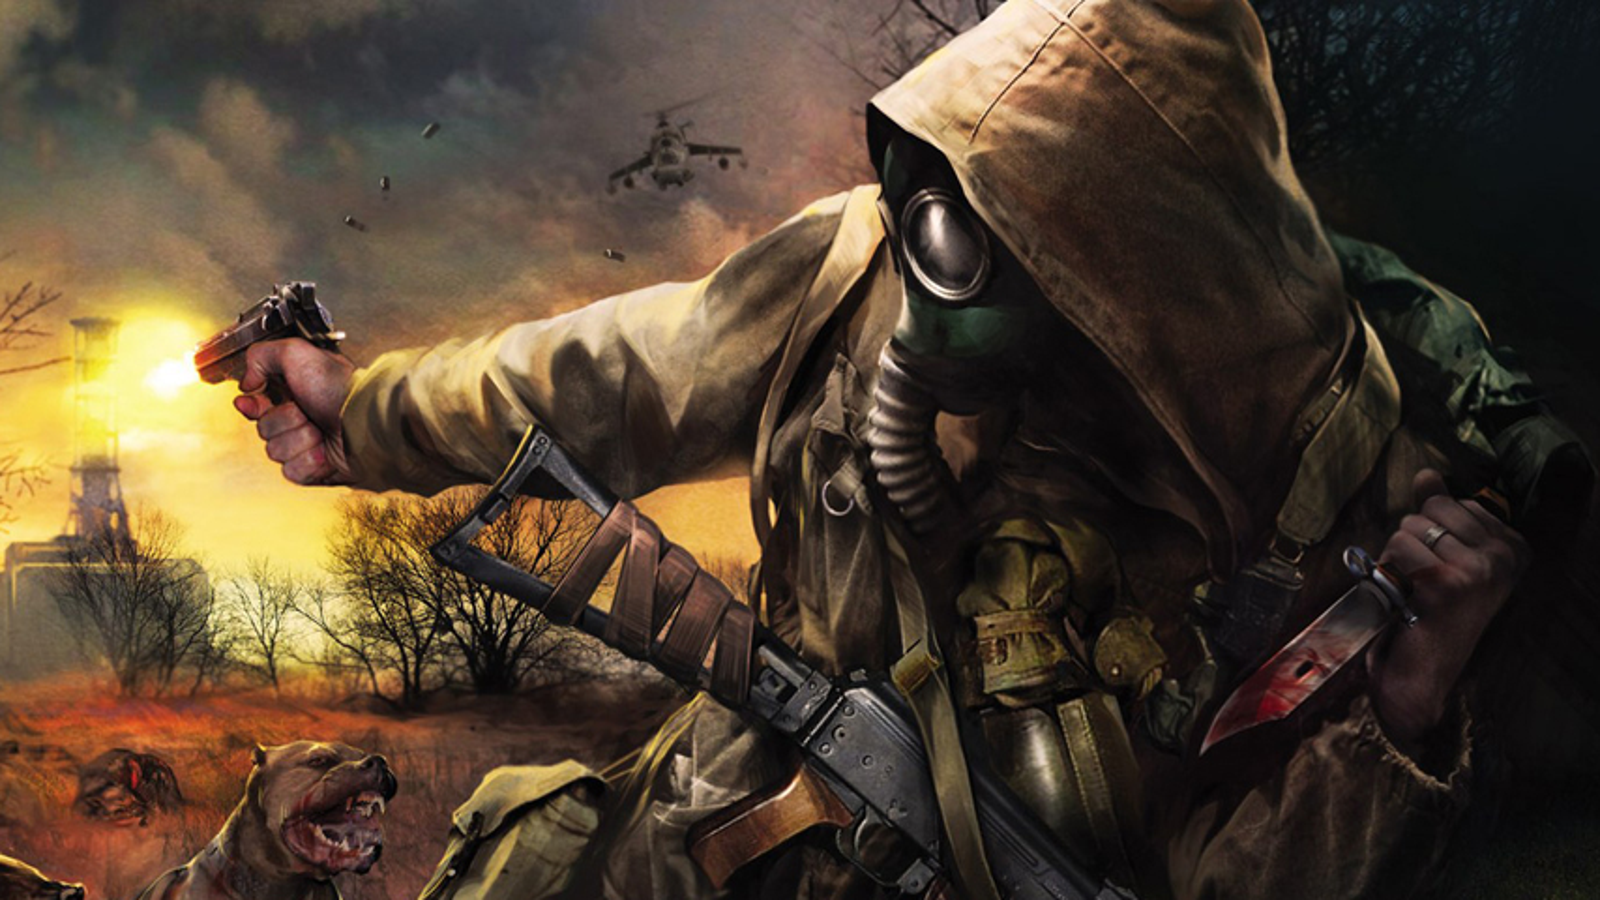 STALKER 2 Was Announced Early In Order To Attract A Publisher